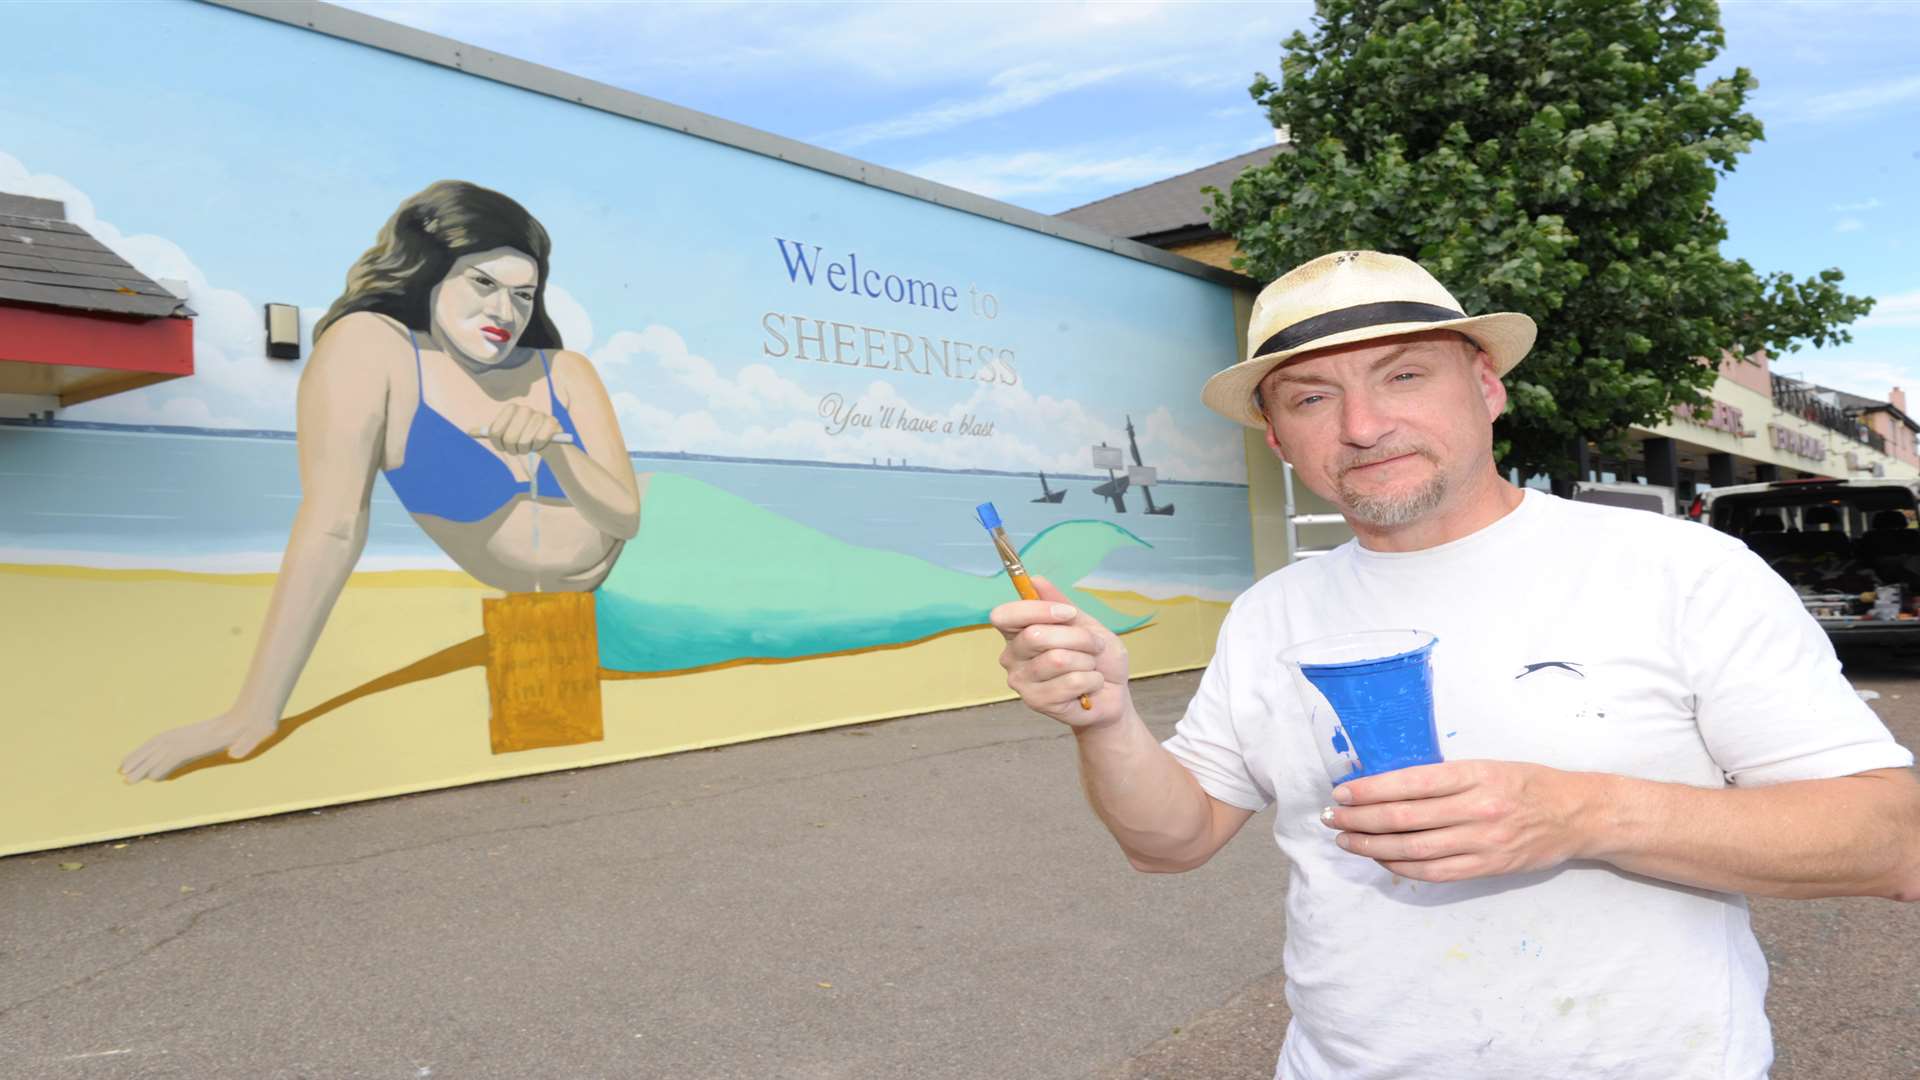 Dean Tweedy was responsible for more than 200 murals across Swale.